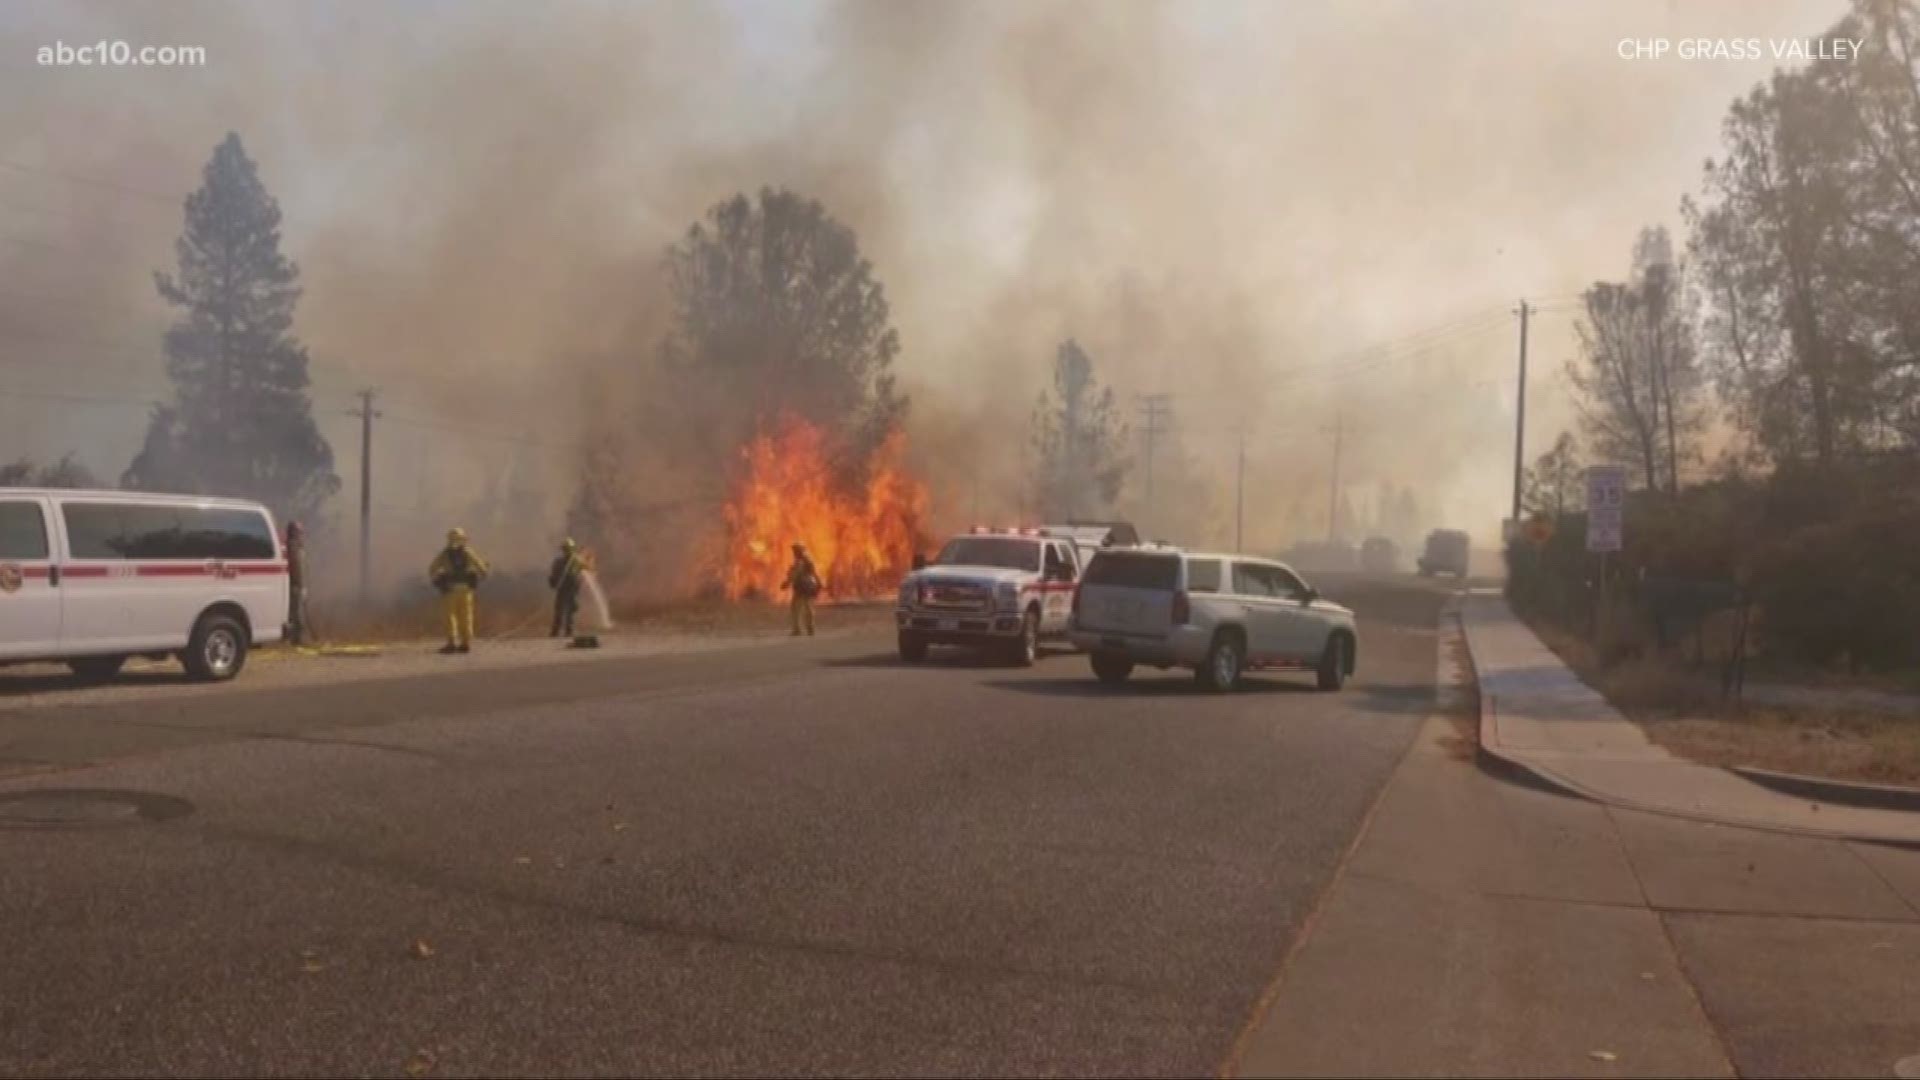 Firefighters are battling a fire near Sutton Way and Idaho Maryland Road in Grass Valley.